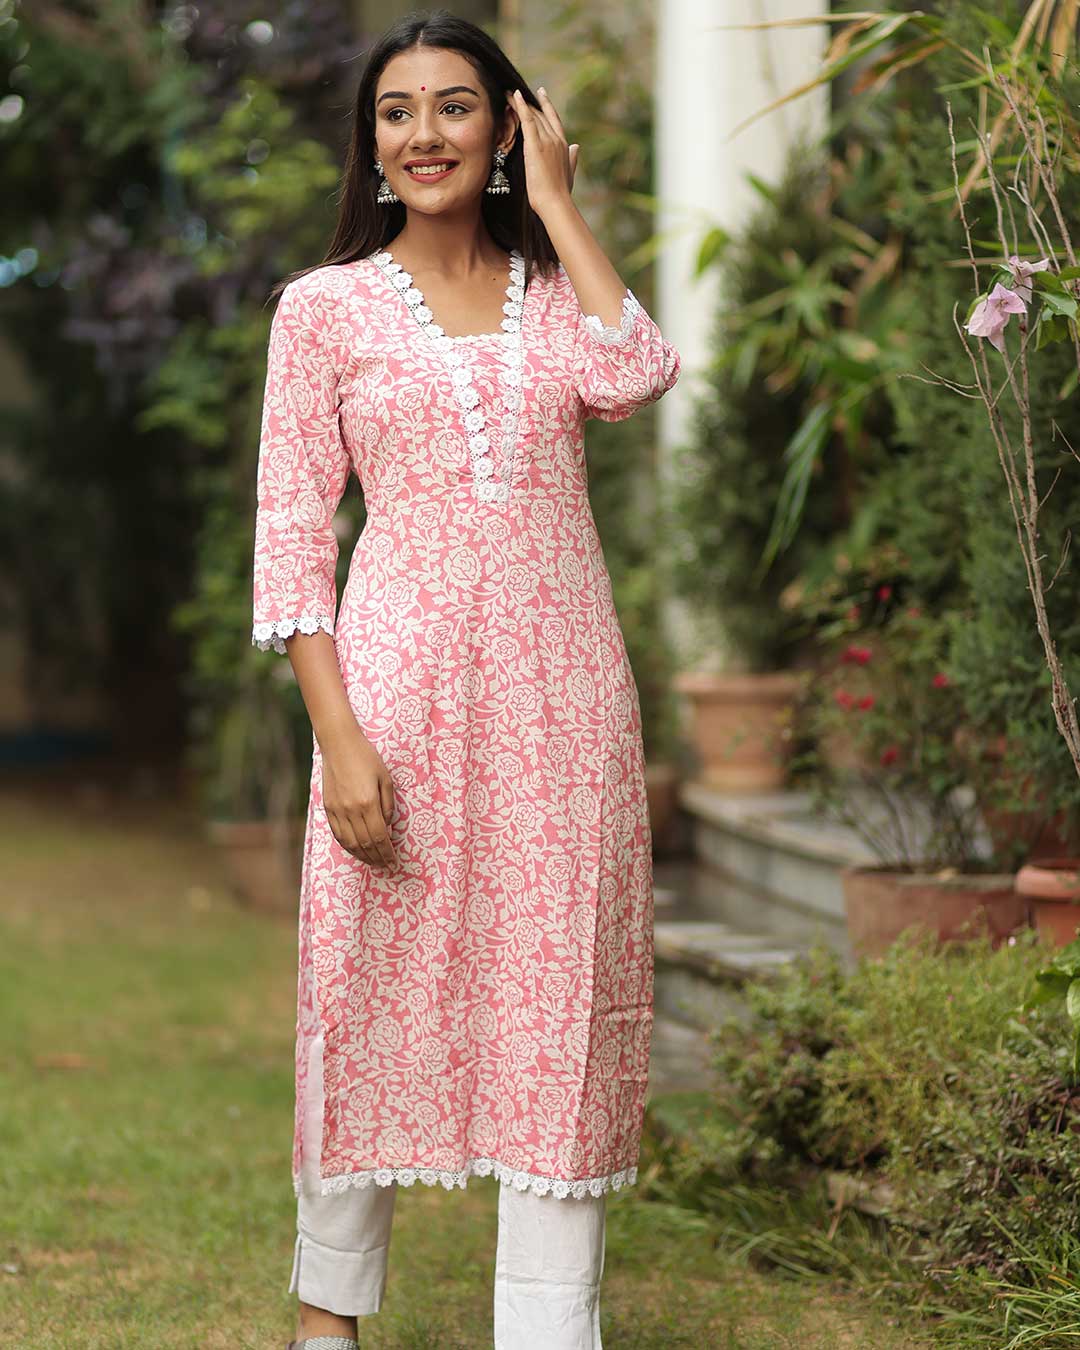 I wish to open a Kurtis business where can I buy wholesale Kurtis in India?